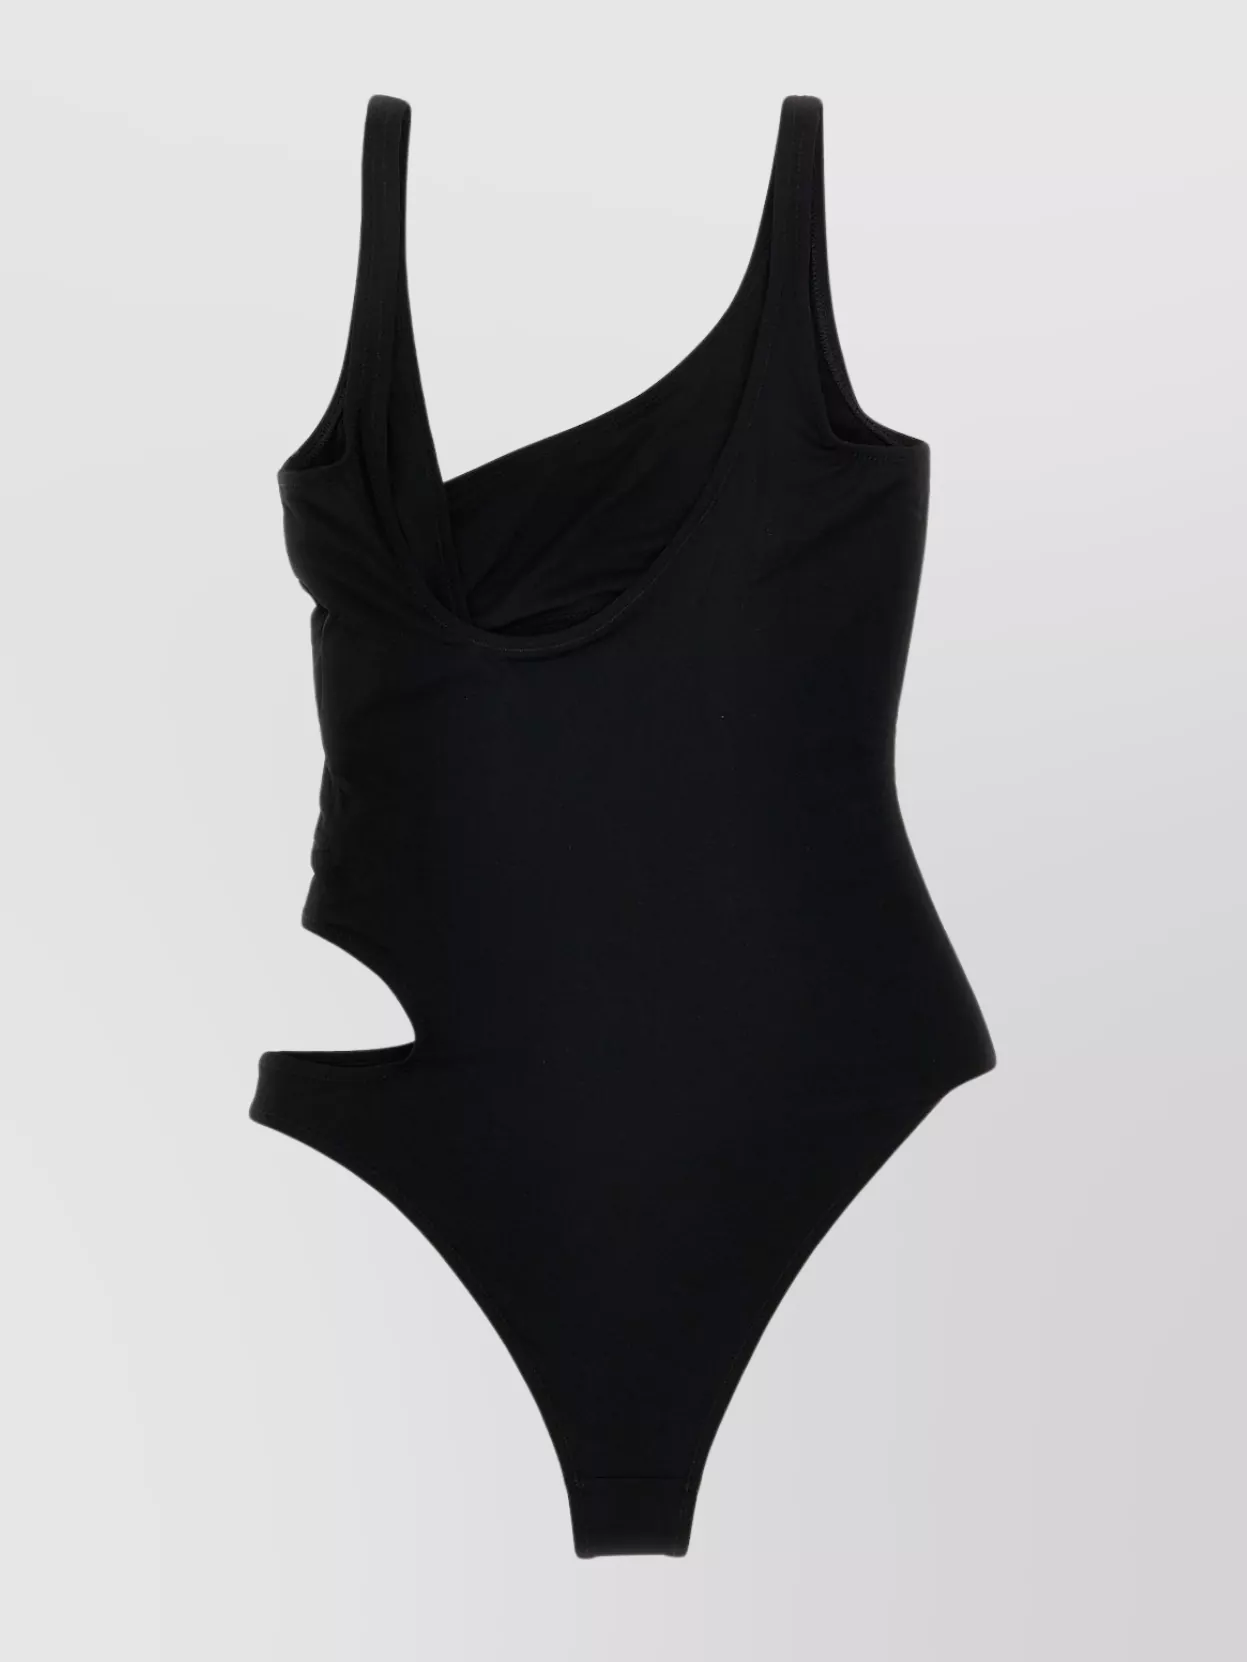 Off-white Swimsuit One-piece Adjustable Straps Asymmetrical Neckline Cut-out Detail In Black